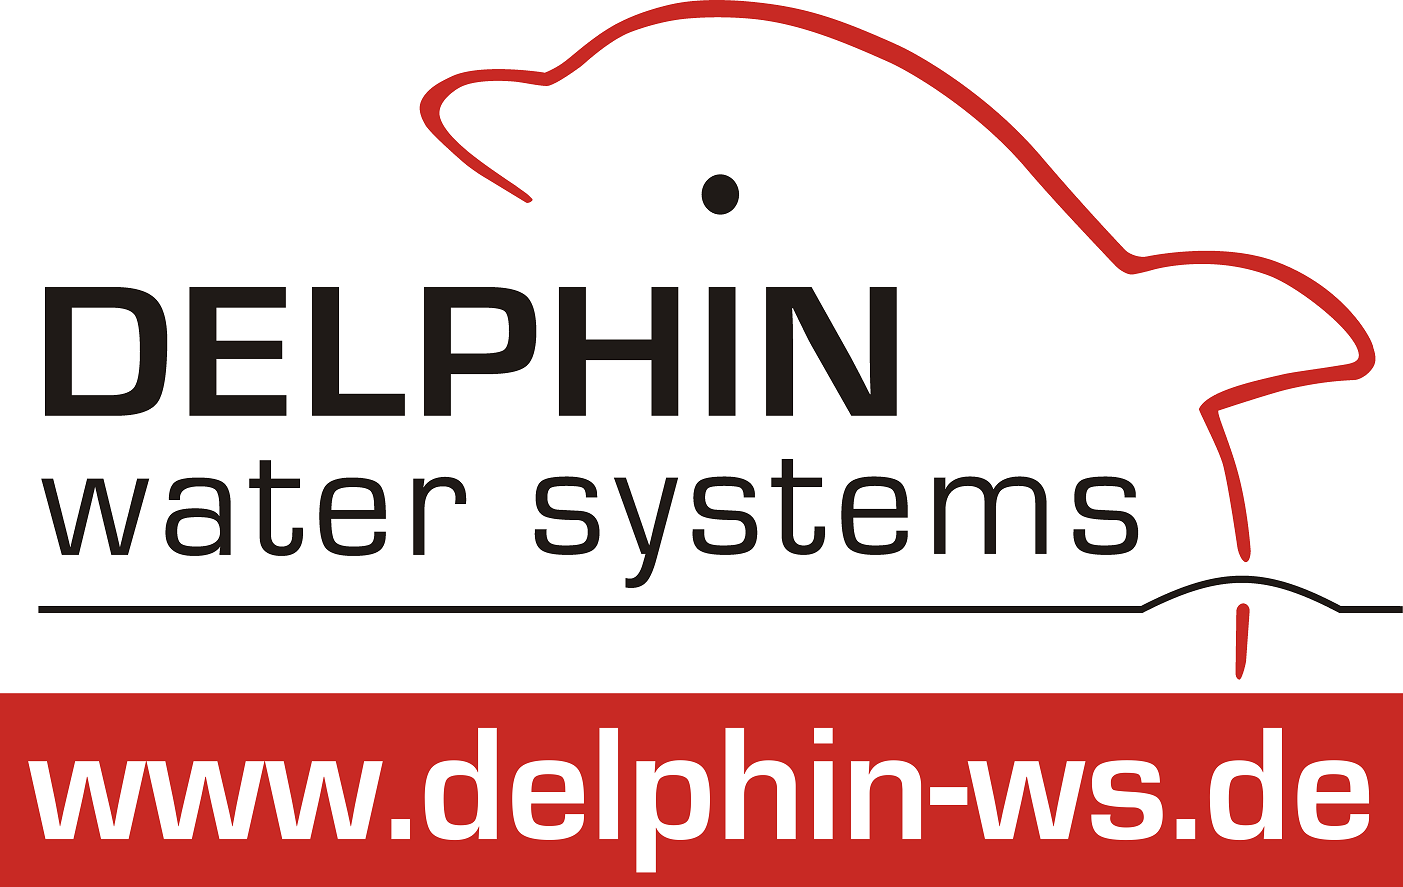 DELPHIN Water Systems GmbH & Co. KG